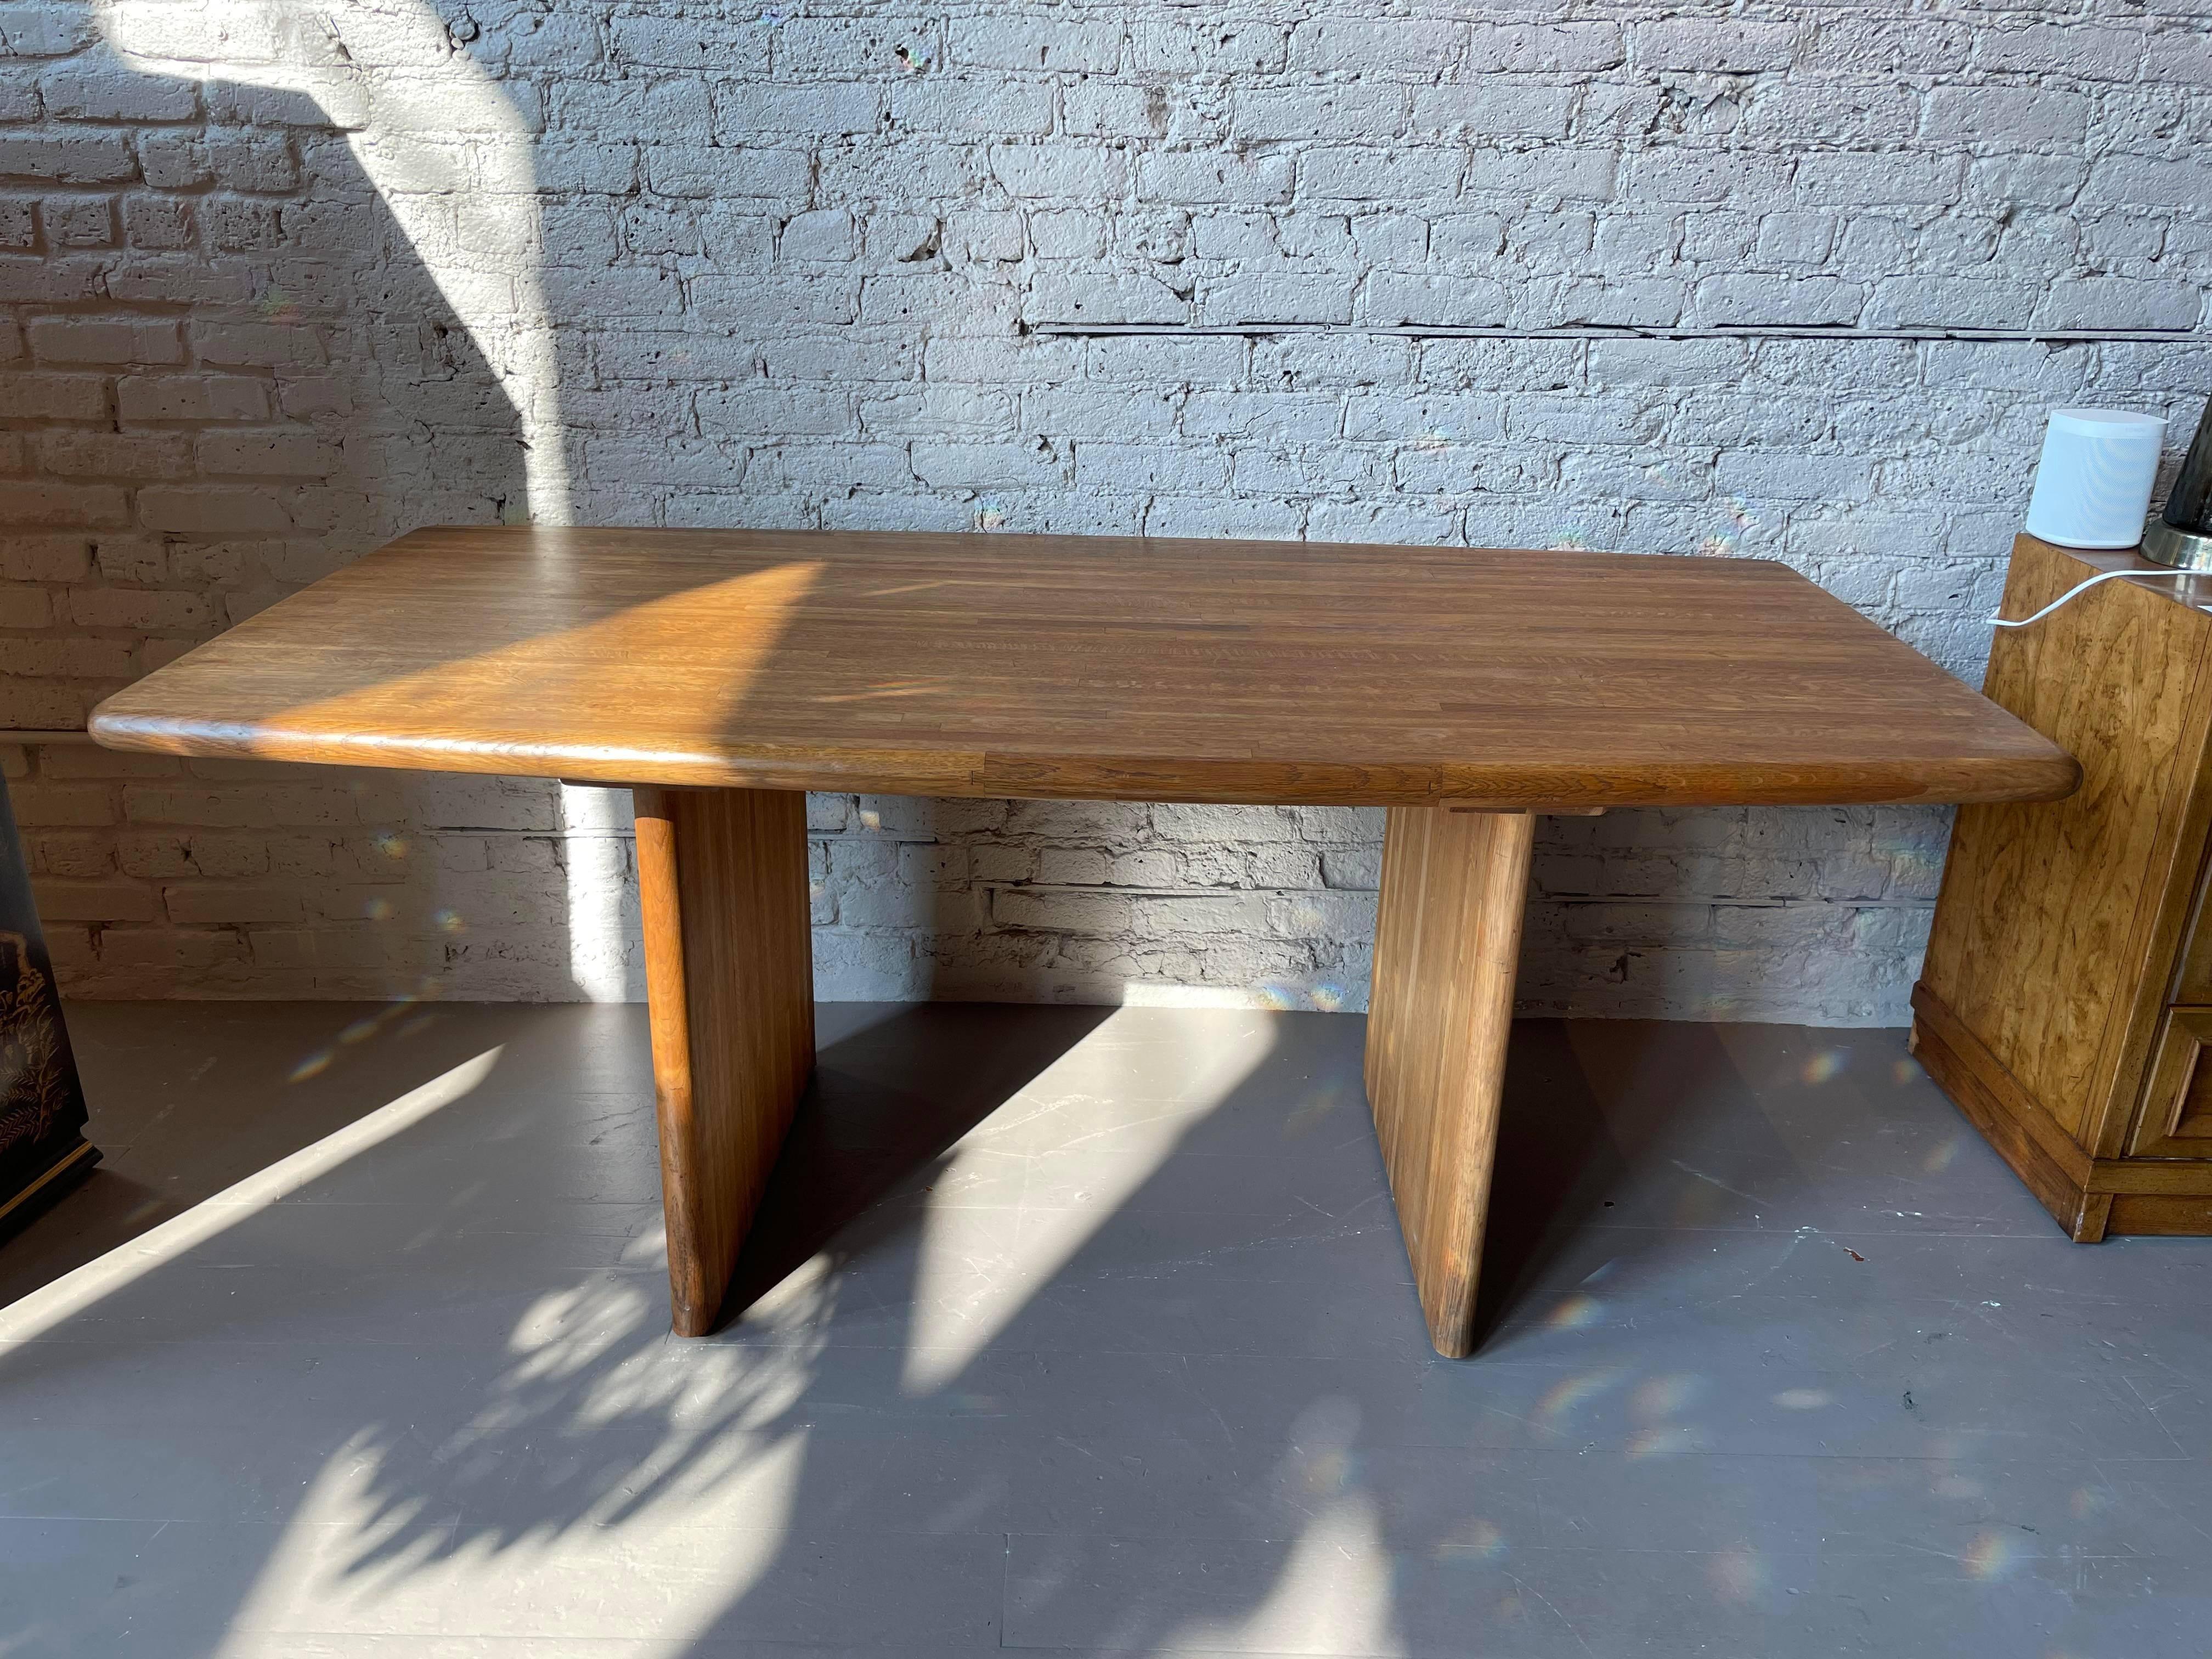 Remarkable mid century dining table/desk! The legs are removable for easy transport. In excellent condition but could use a light sand

Dimensions: 71